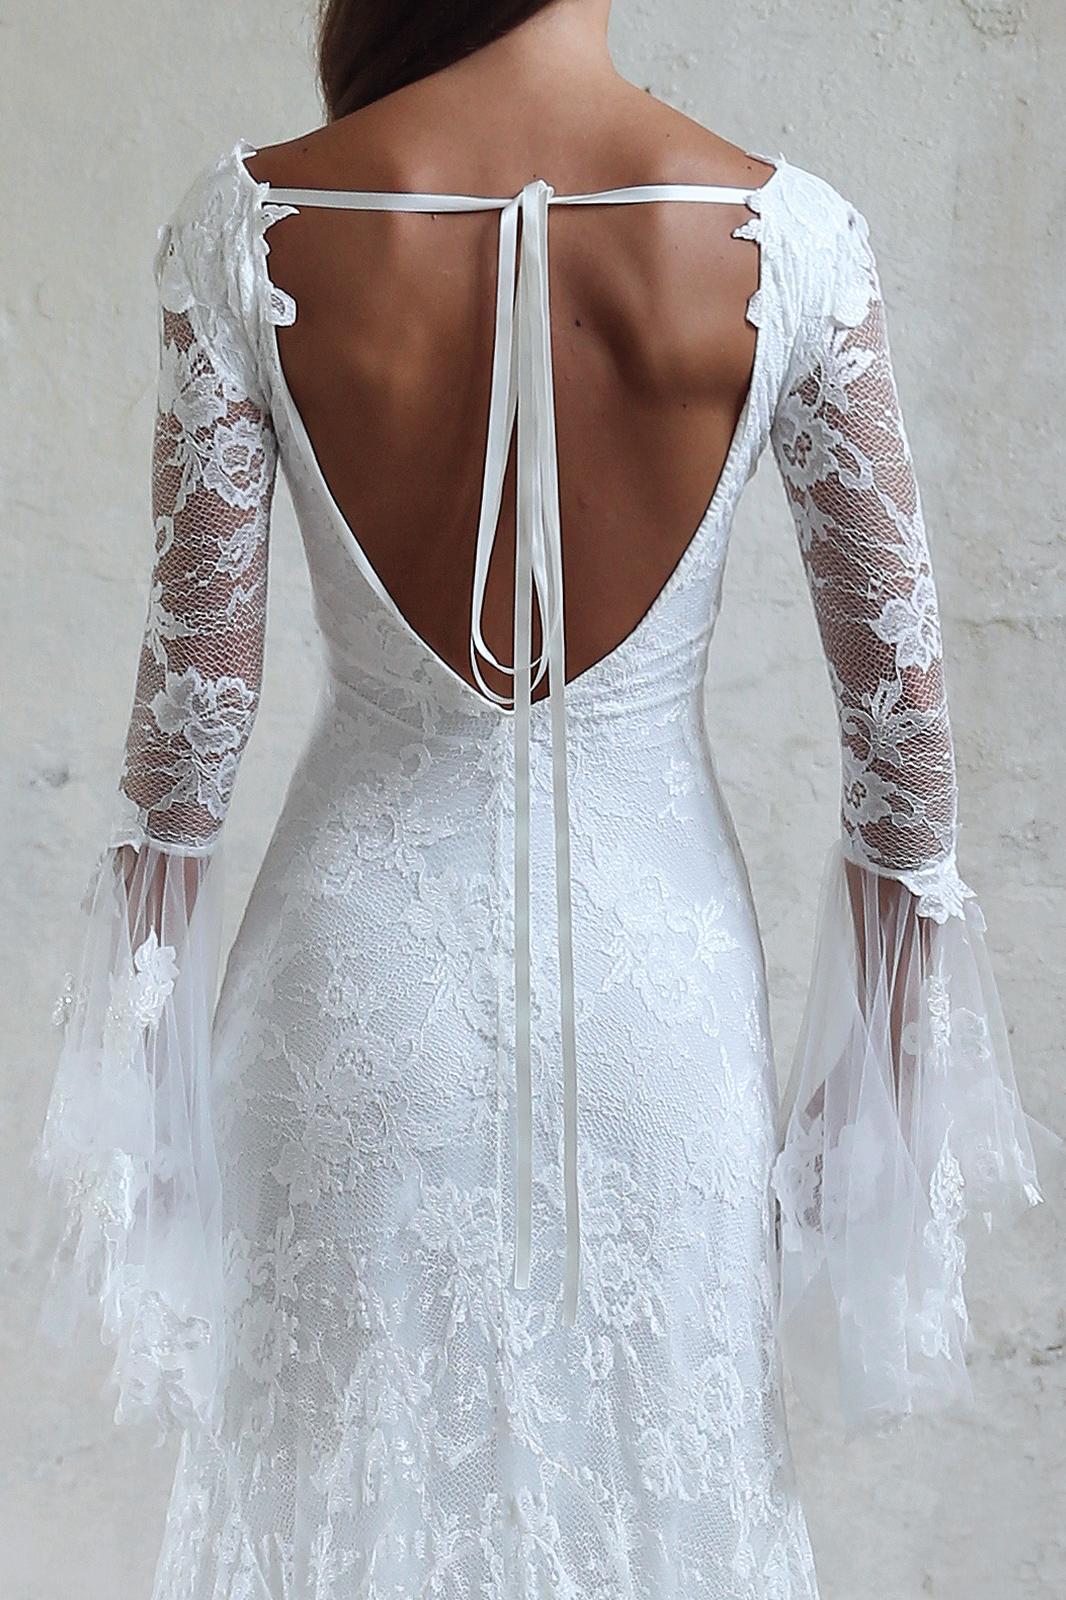 Back of woman wearing white lace gown